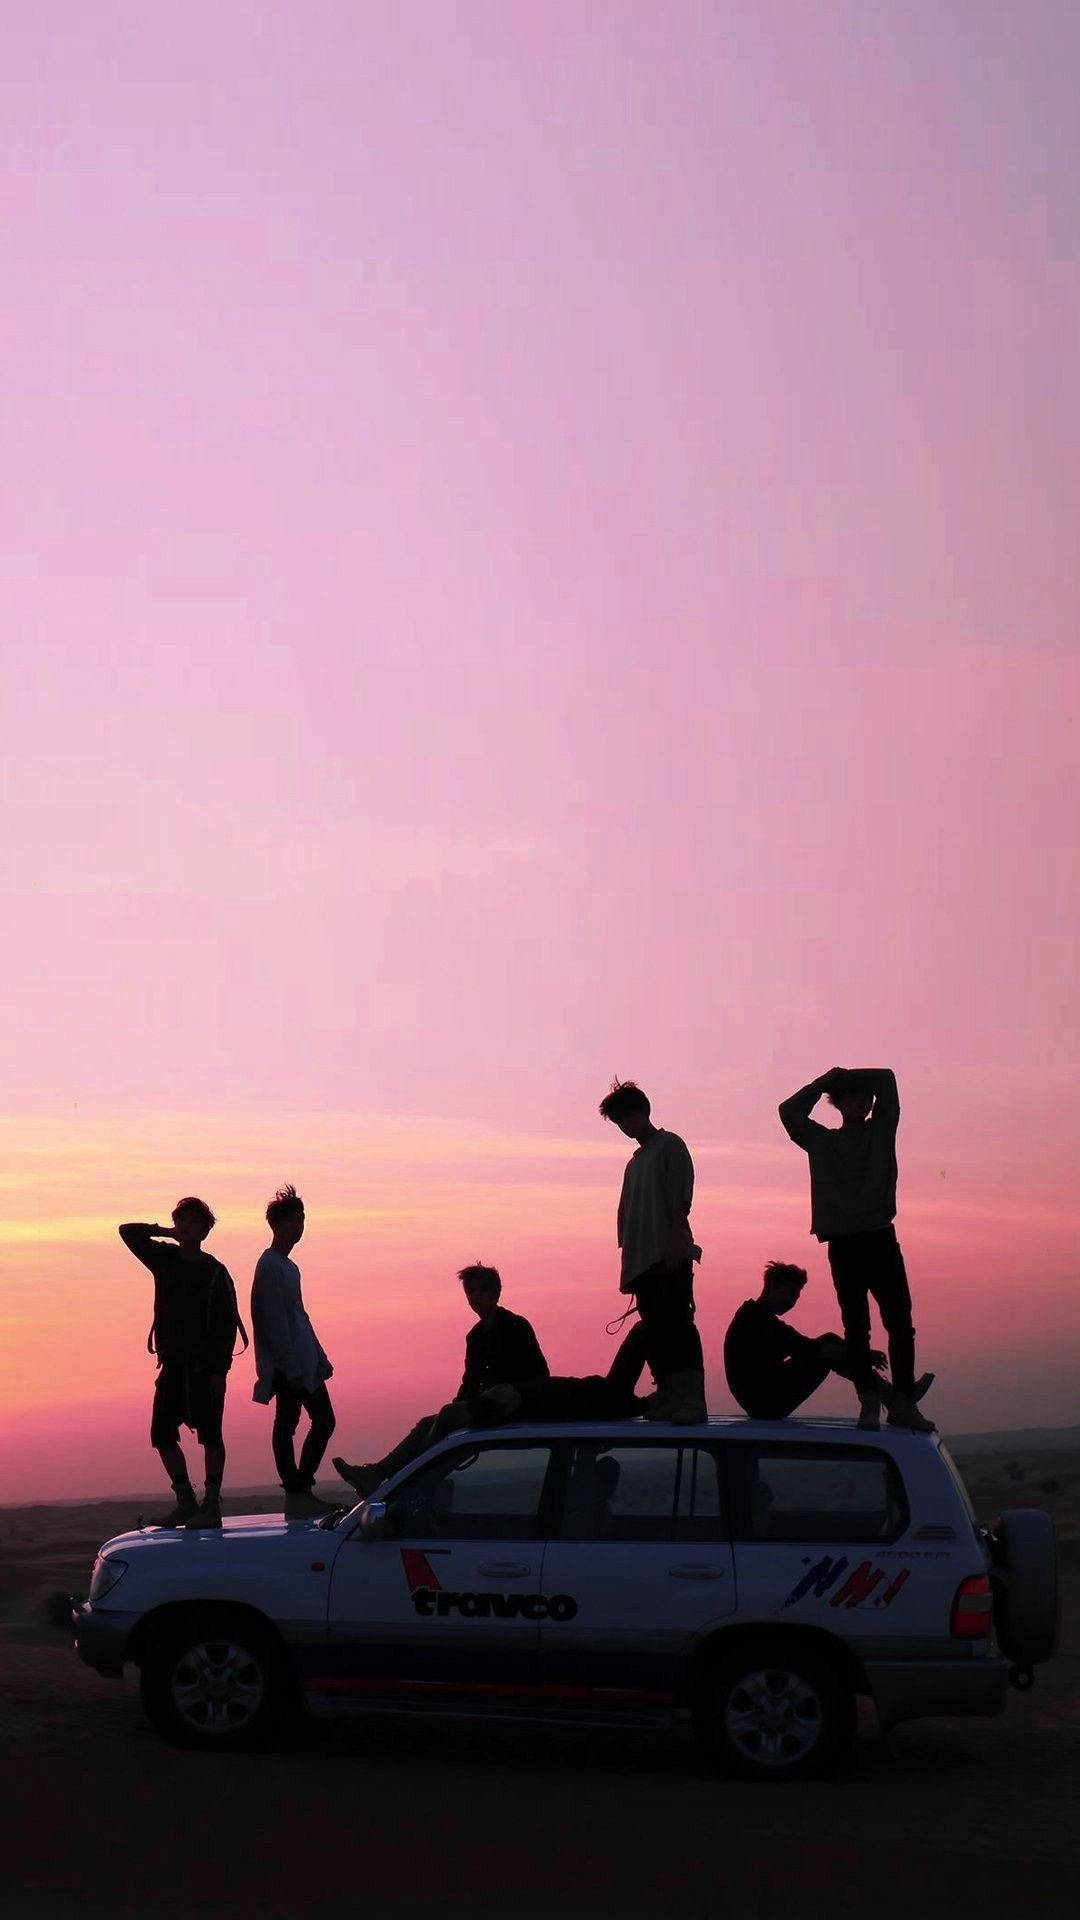 Bangtantvsilhouette Translated To Spanish In The Context Of Computer Or Mobile Wallpaper Would Be 